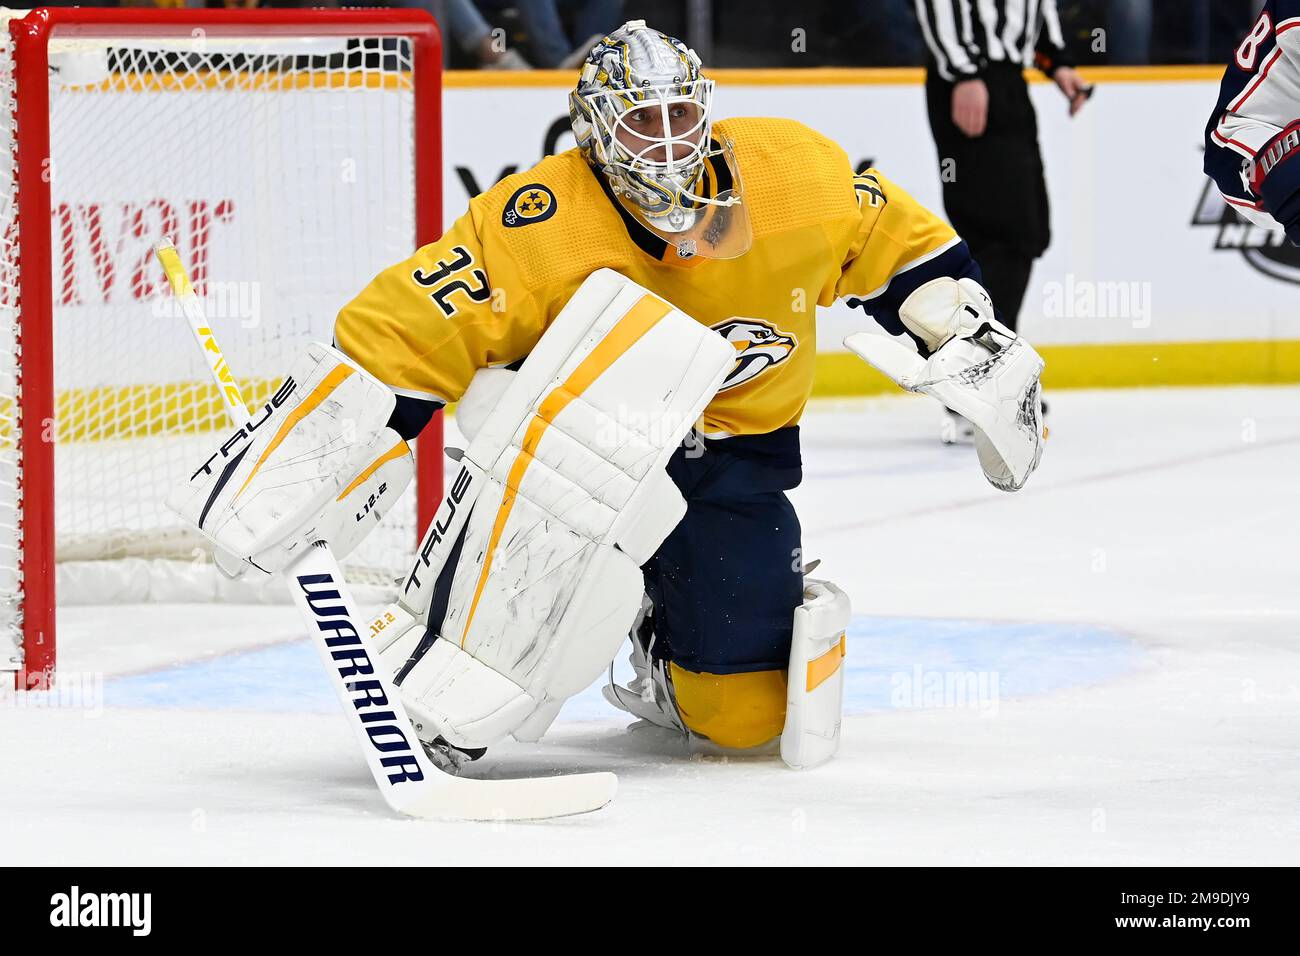 Nashville Predators goaltender Kevin Lankinen (32) plays against the Columbus Blue Jackets during the third period of an NHL hockey game Tuesday, Jan